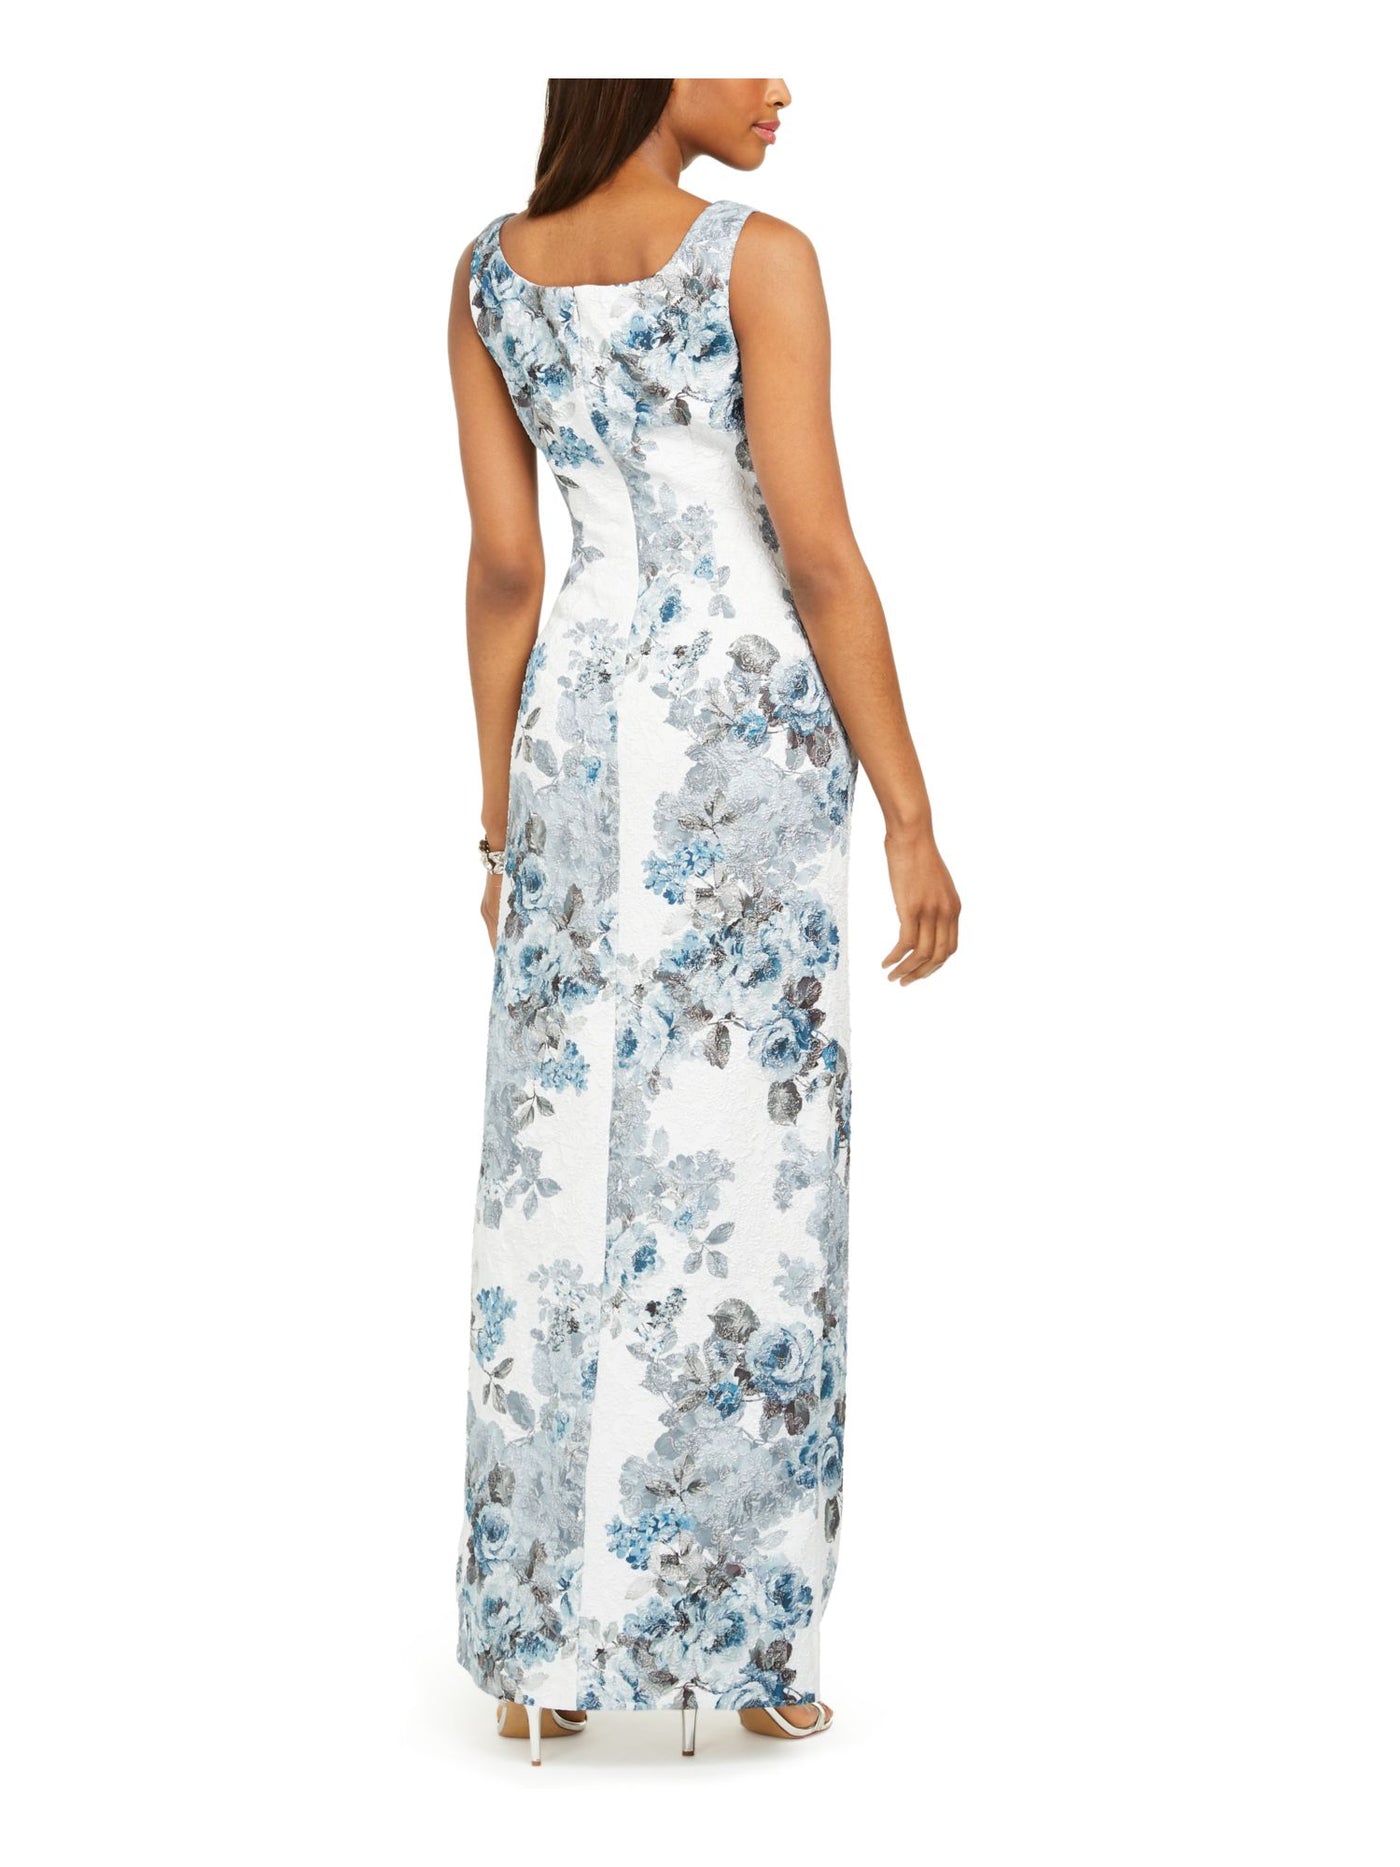 ADRIANNA PAPELL Womens Blue Slitted Floral Sleeveless Scoop Neck Maxi Evening Sheath Dress 2